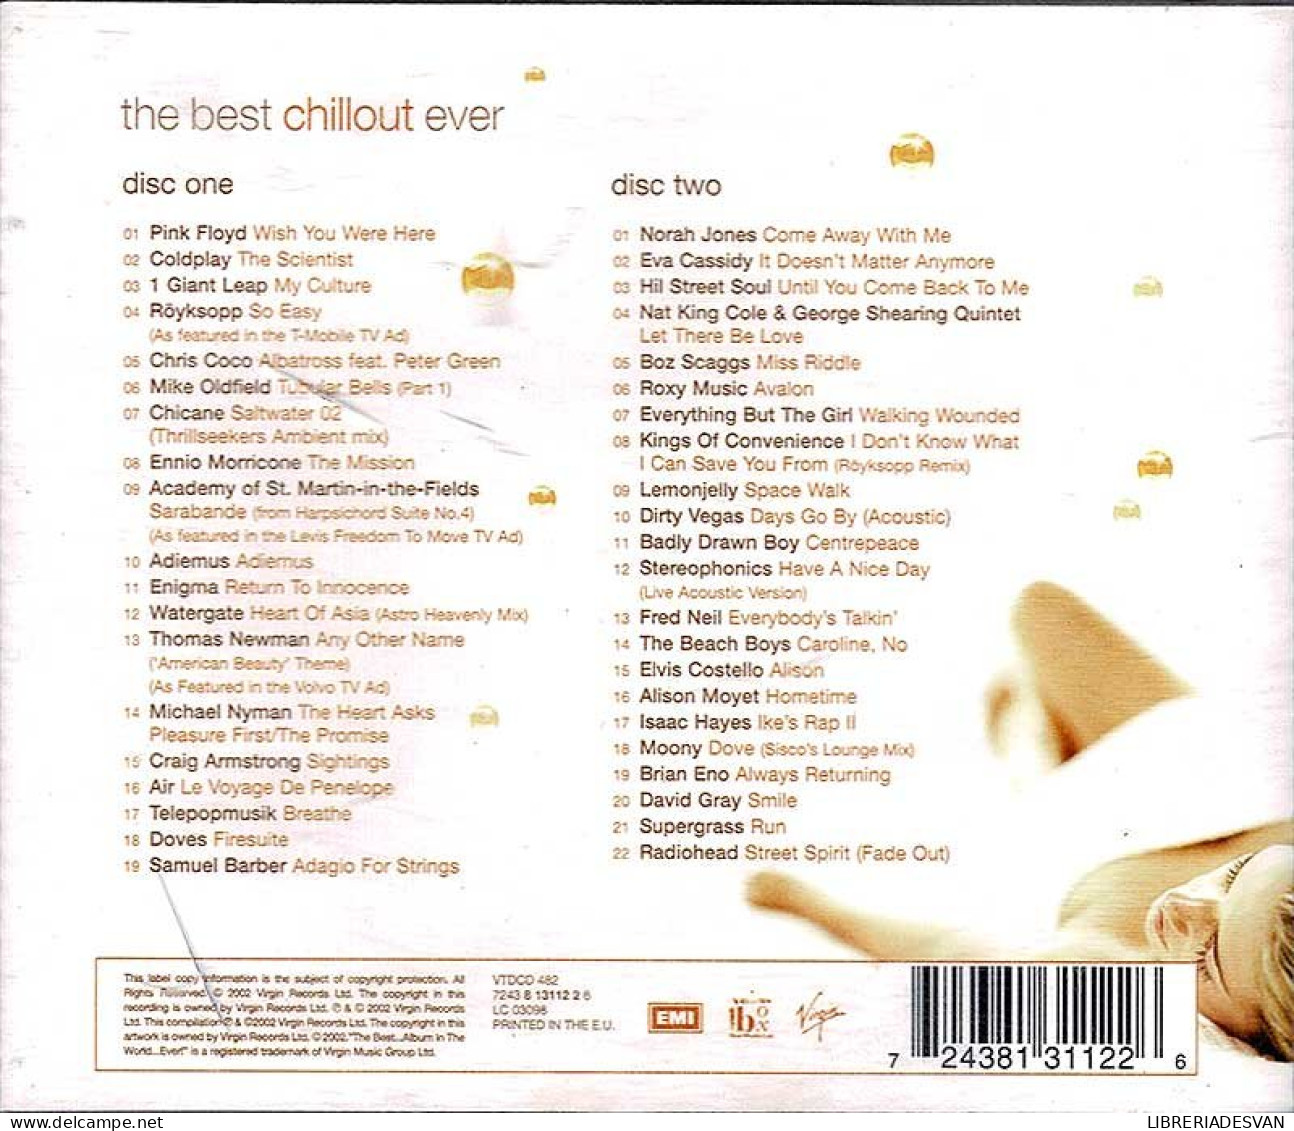 The Best Chillout Ever. 2 X CD - Nueva Era (New Age)